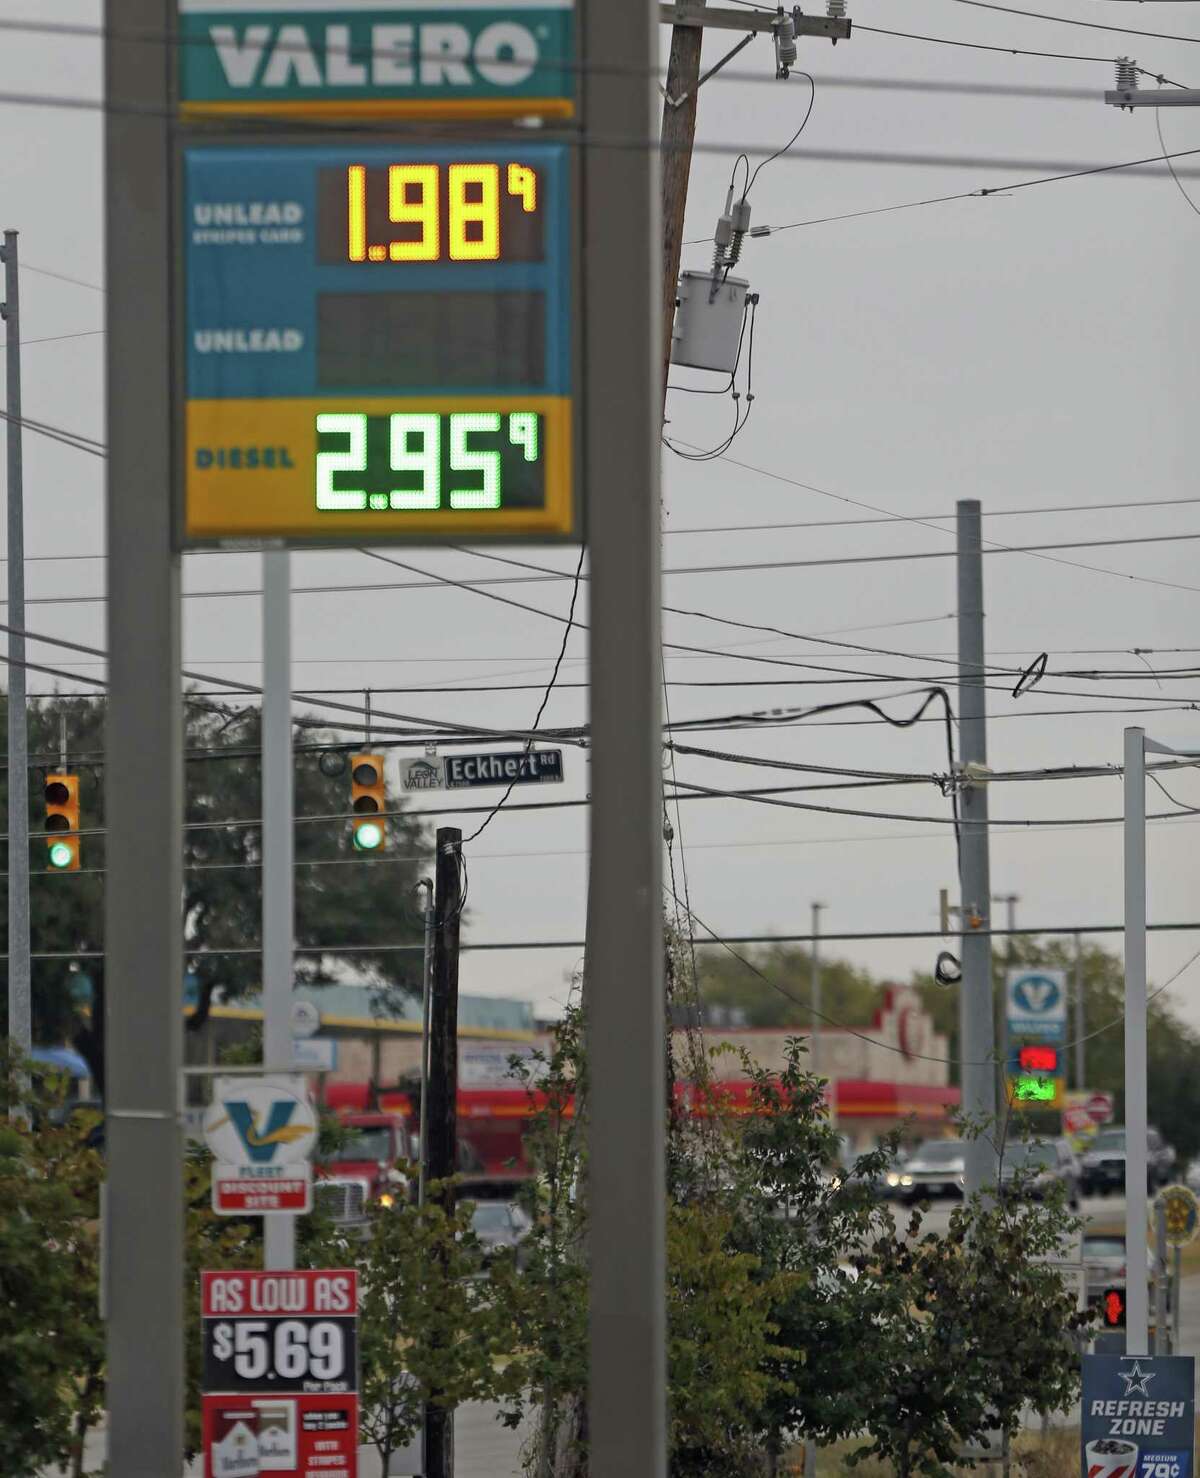 Average gas prices in San Antonio have dipped below $2 for the first time in 2018.